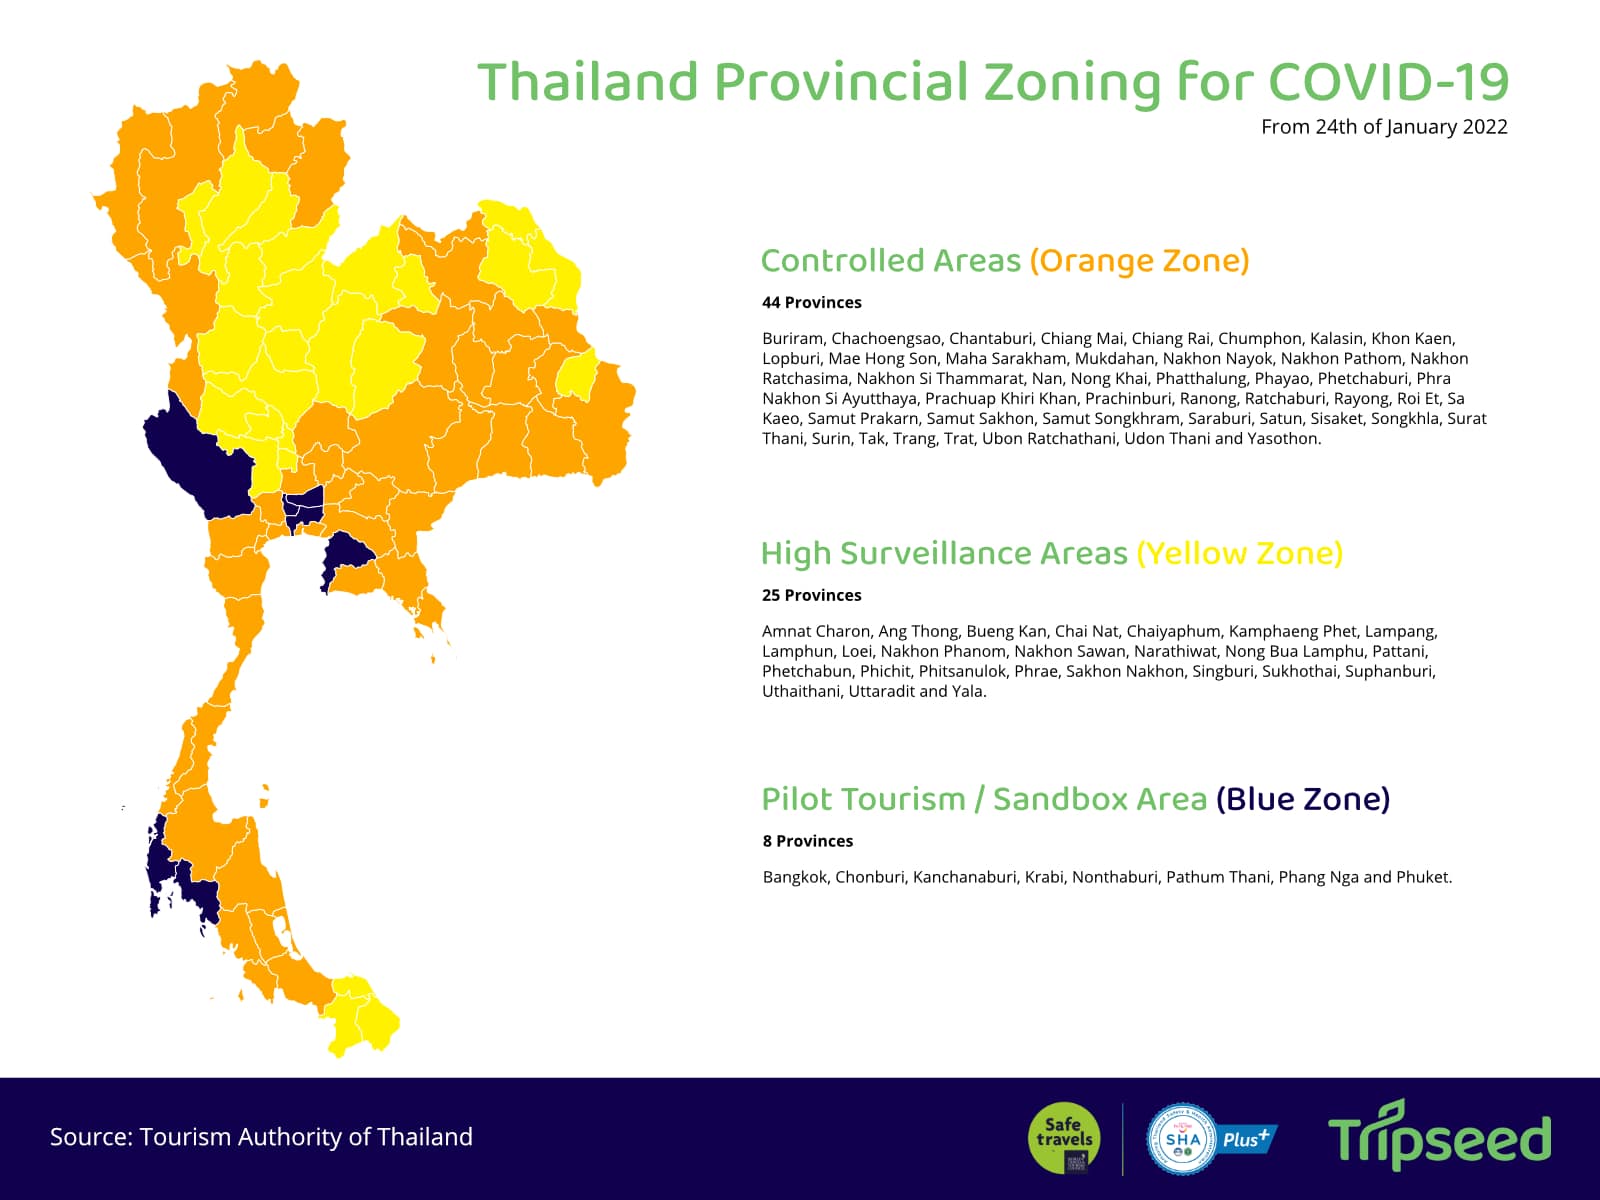 Map of Thailand displaying the covid-19 status by province